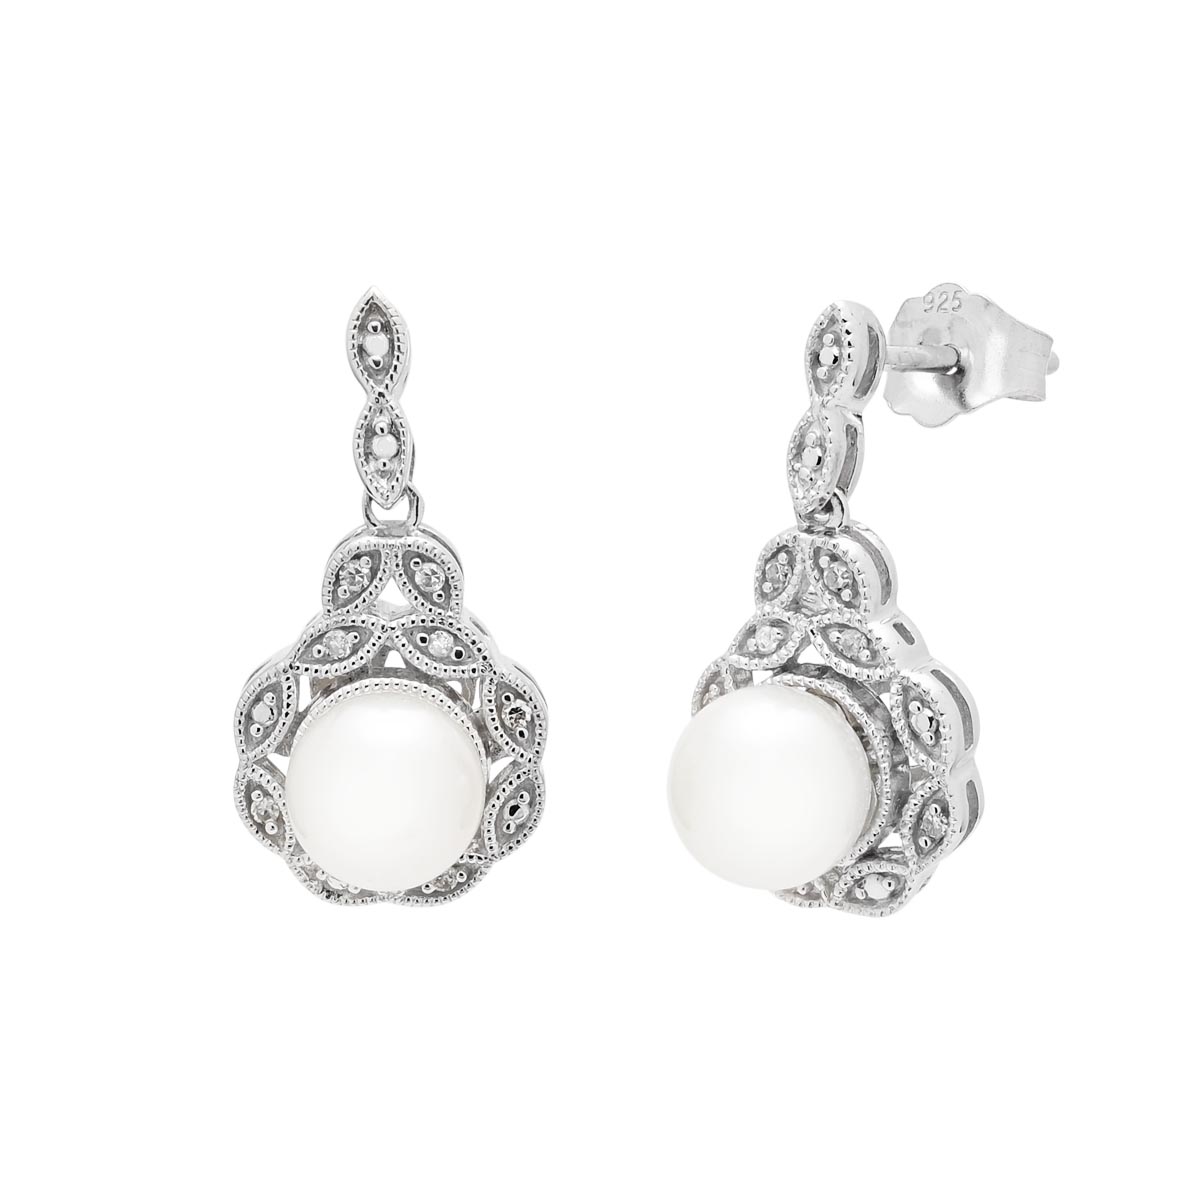 Cultured Freshwater Pearl Earrings in Sterling Silver with Diamonds (1/20ct tw and 6mm pearls)